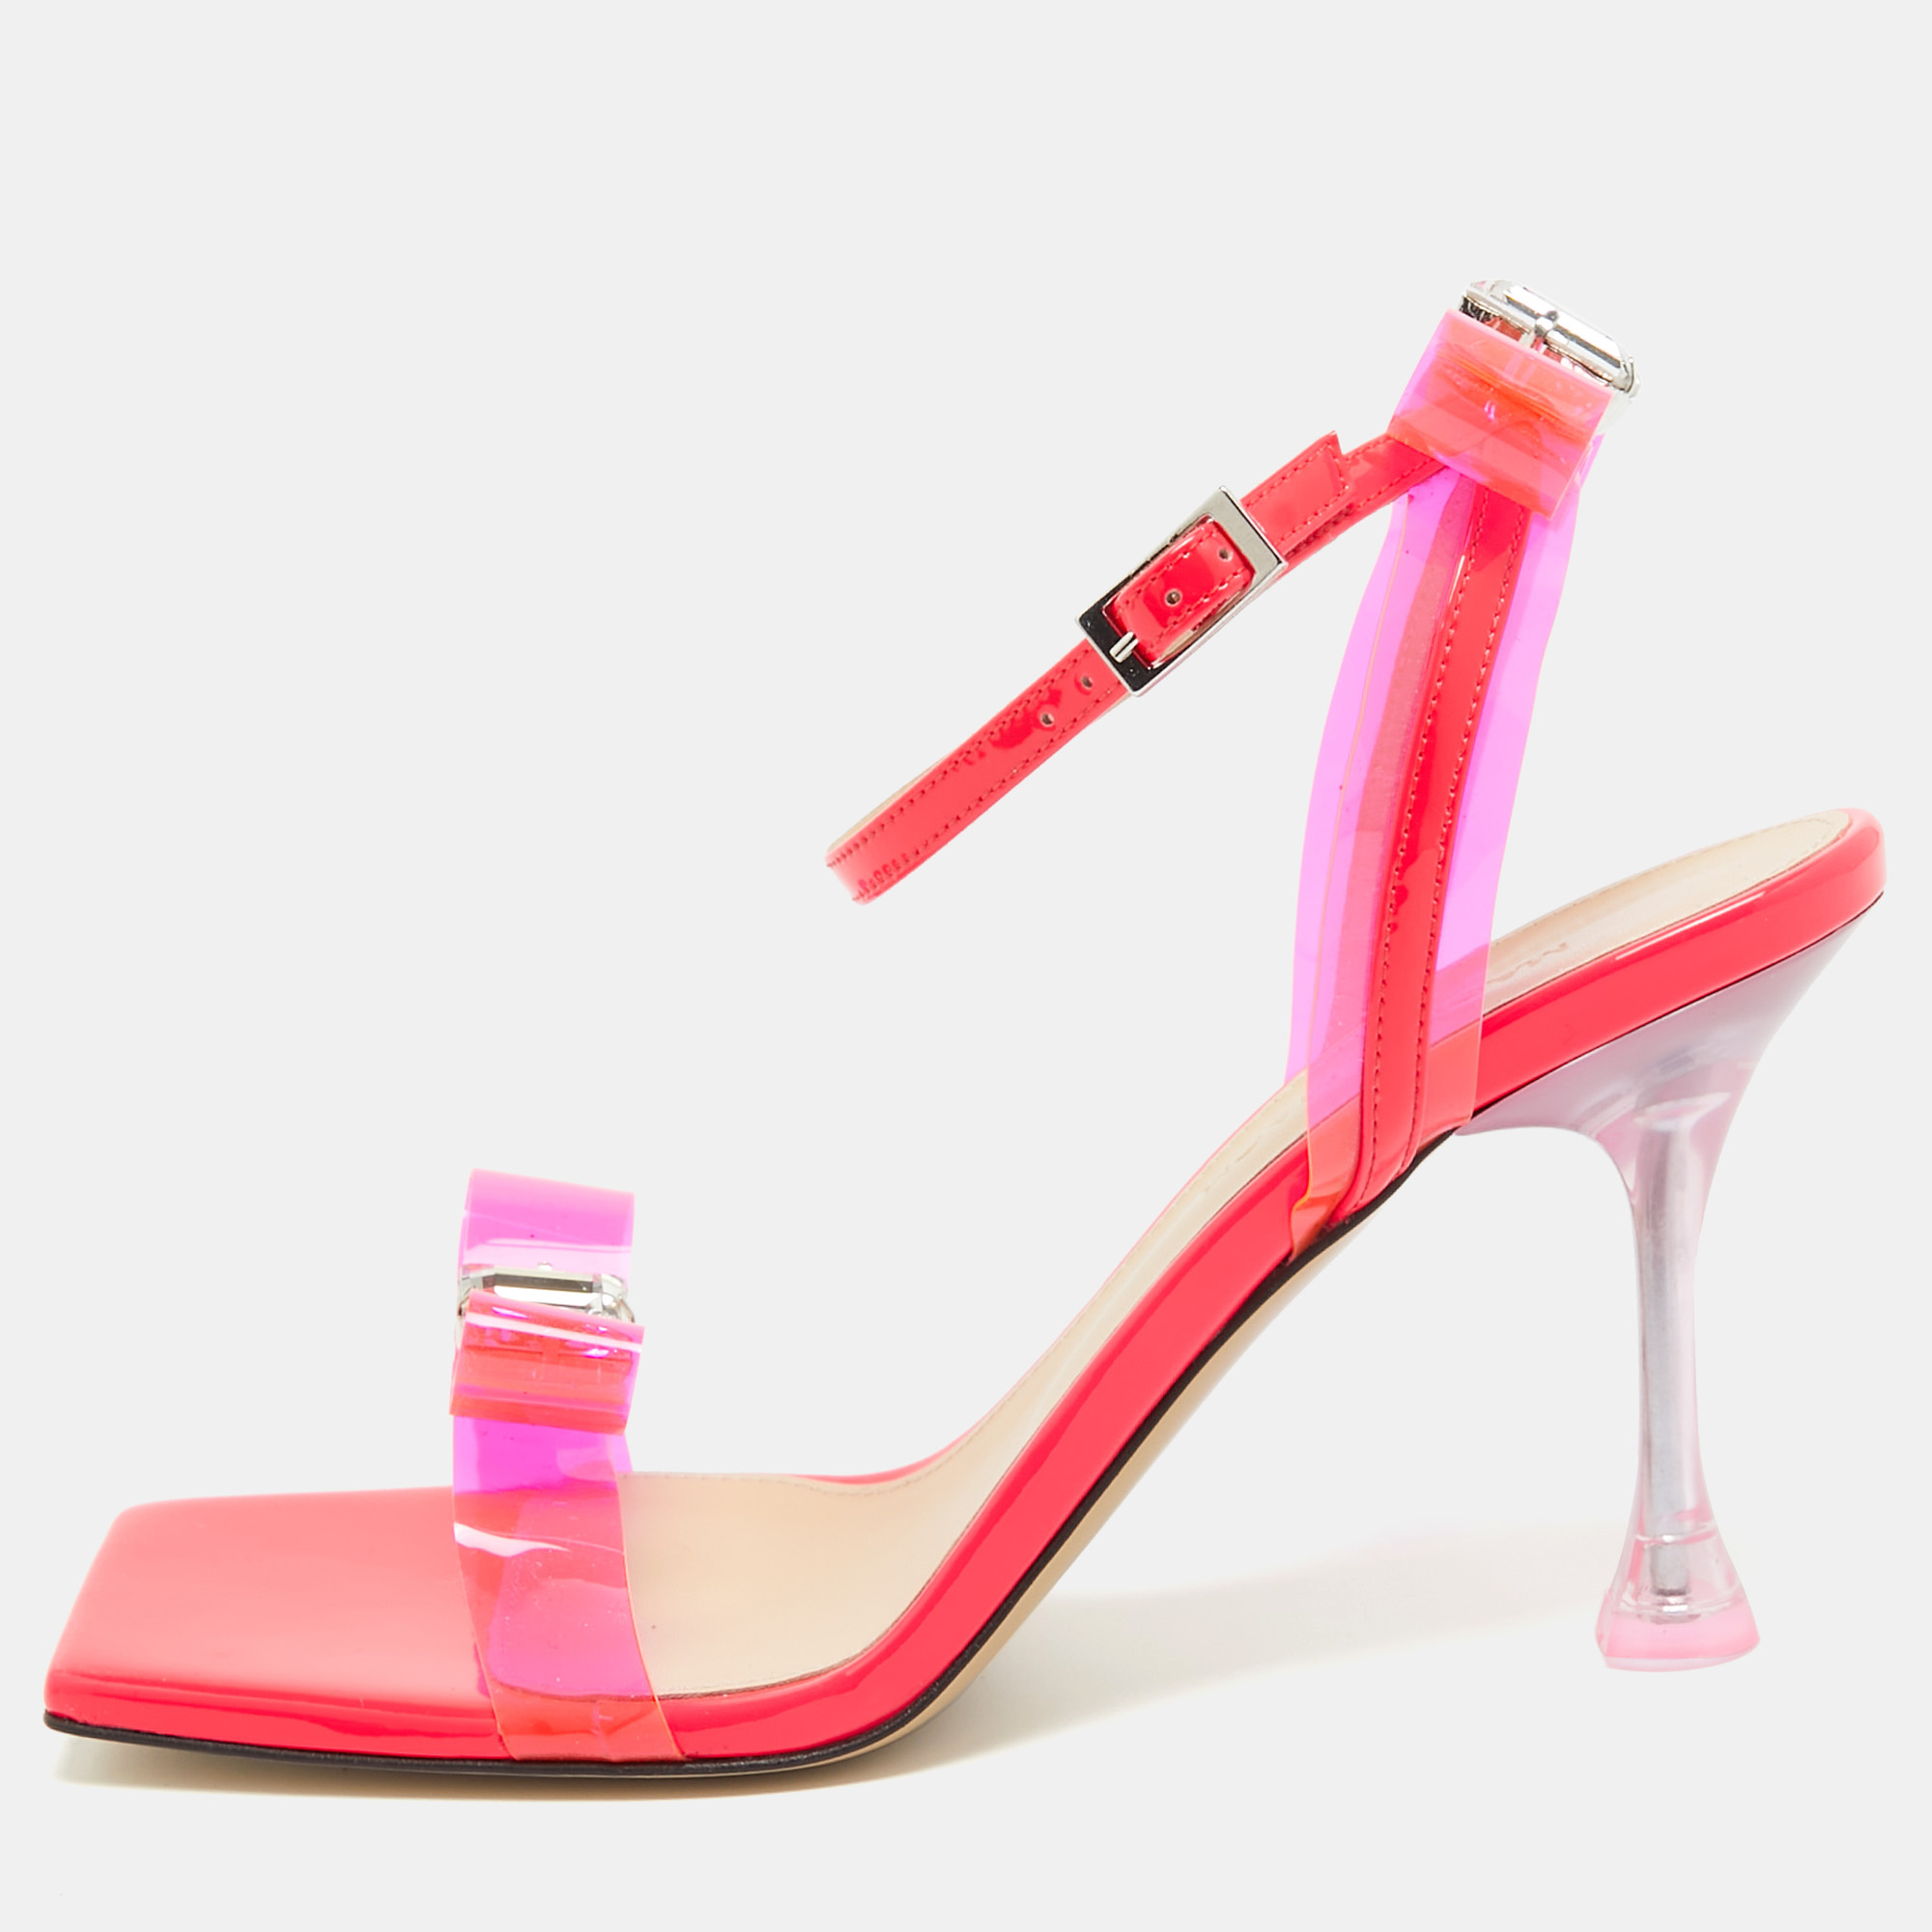 Mach & mach neon pink pvc and patent leather french bow sandals size 37.5